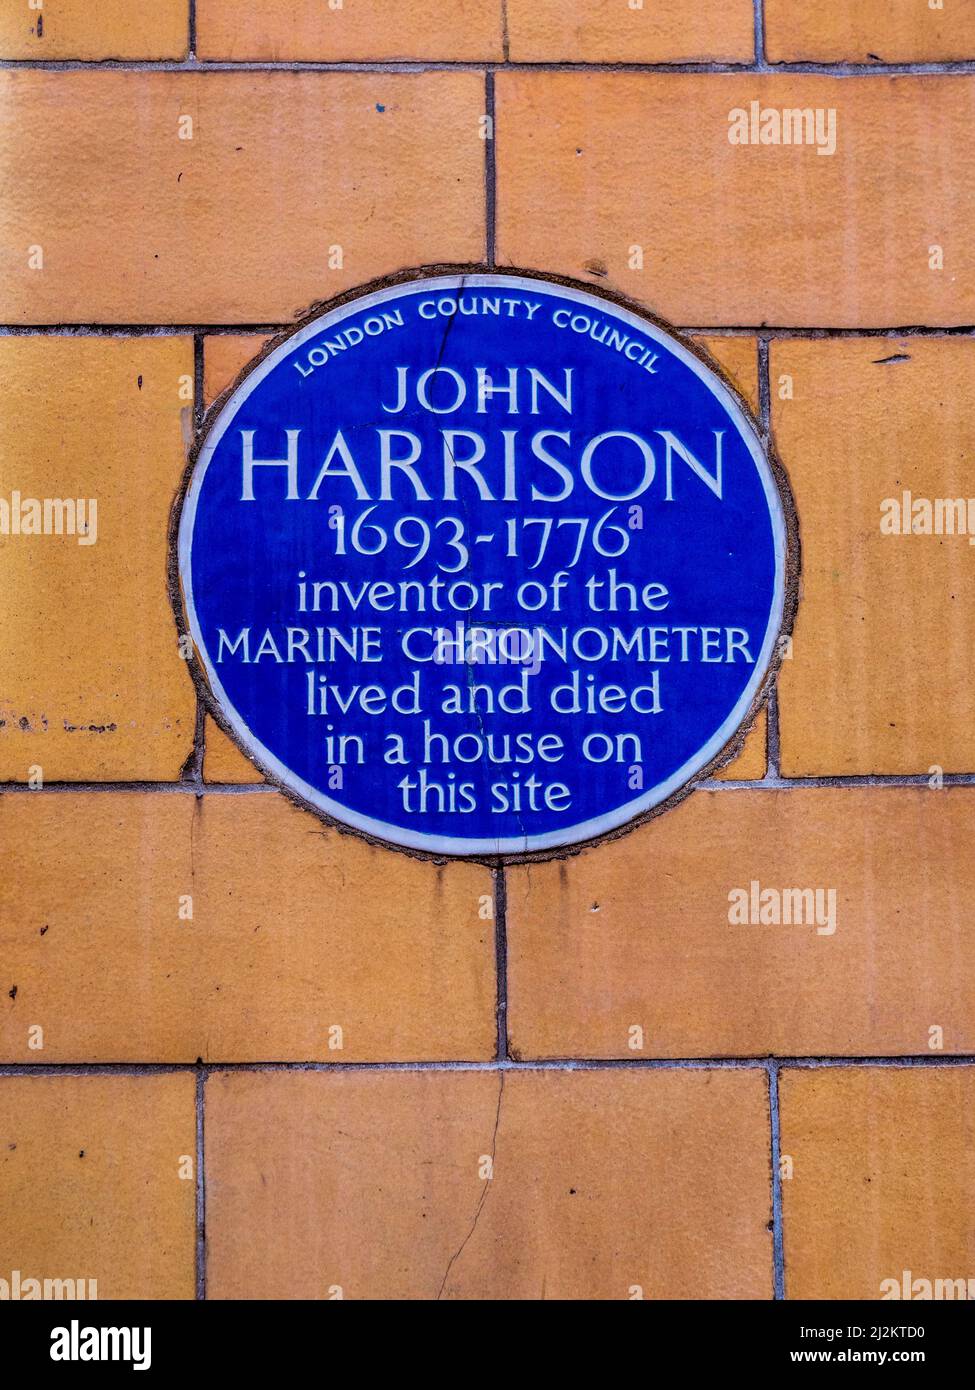 John Harrison Blue Plaque London - John Harrison invented the marine chronometer. Plaque on his home in Summit House, Red Lion Square, Holborn London Stock Photo